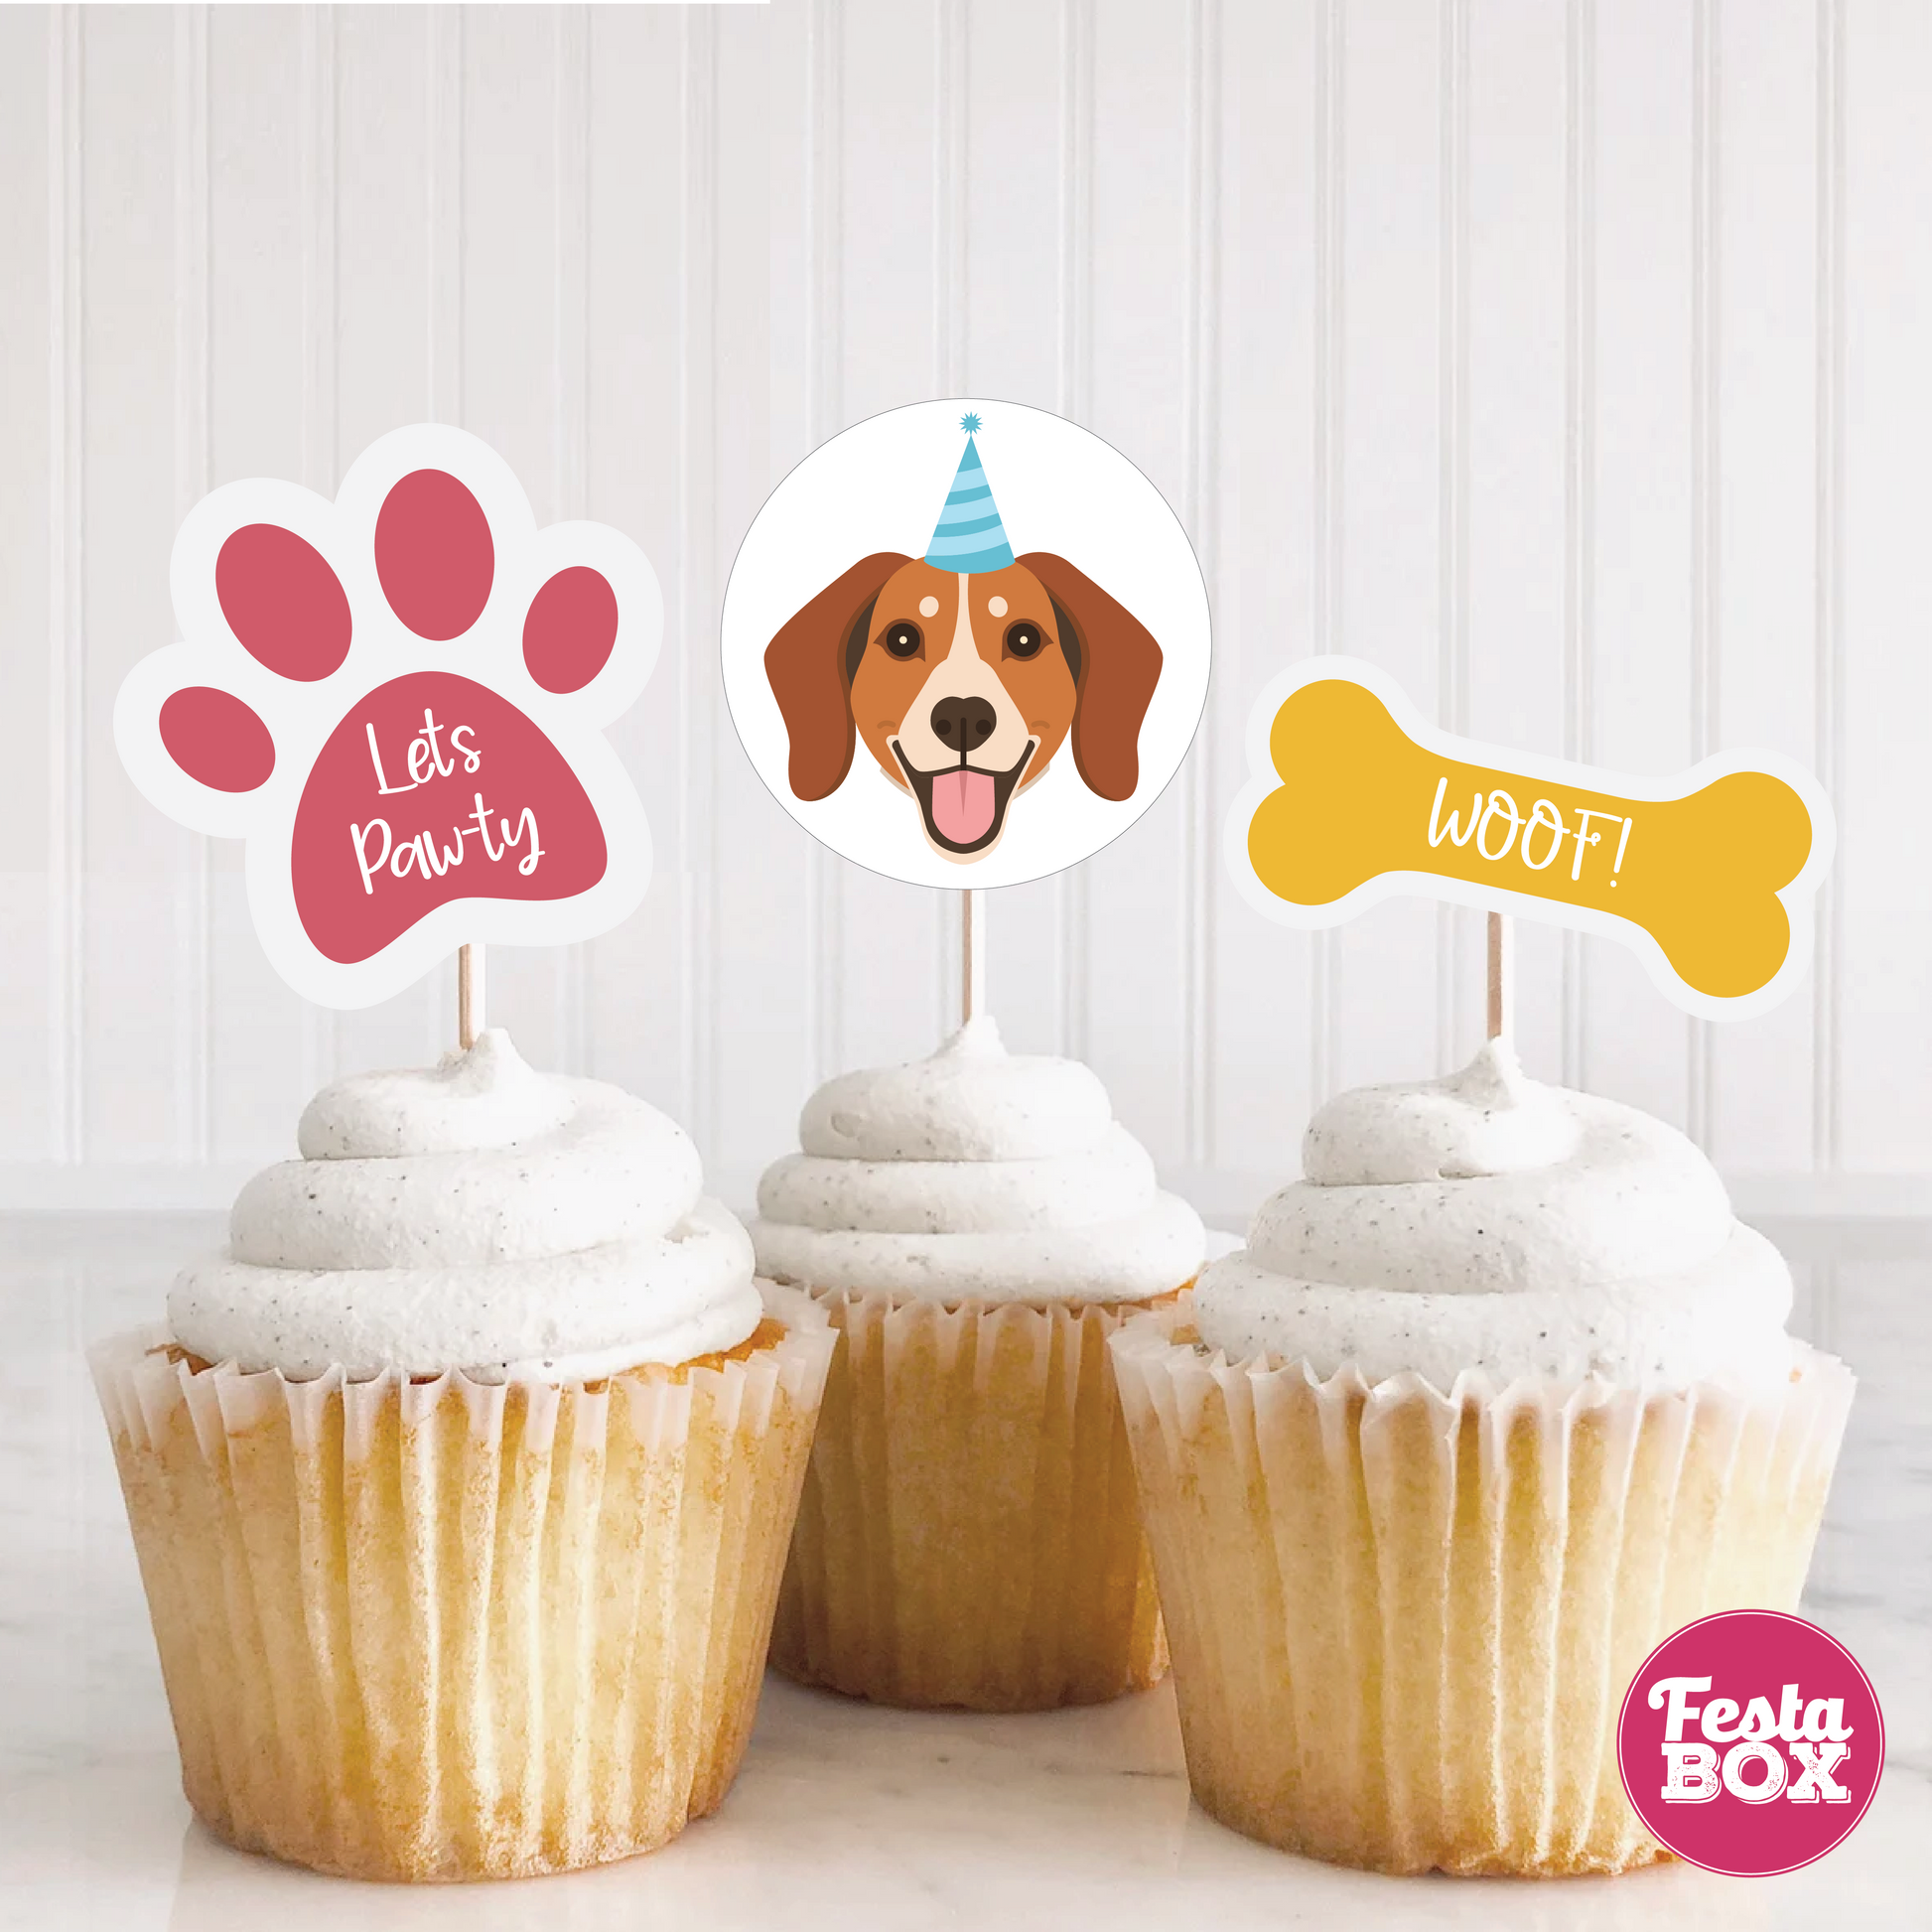 Cupcake toppers under the Puppy Birthday Party Theme by Festabox